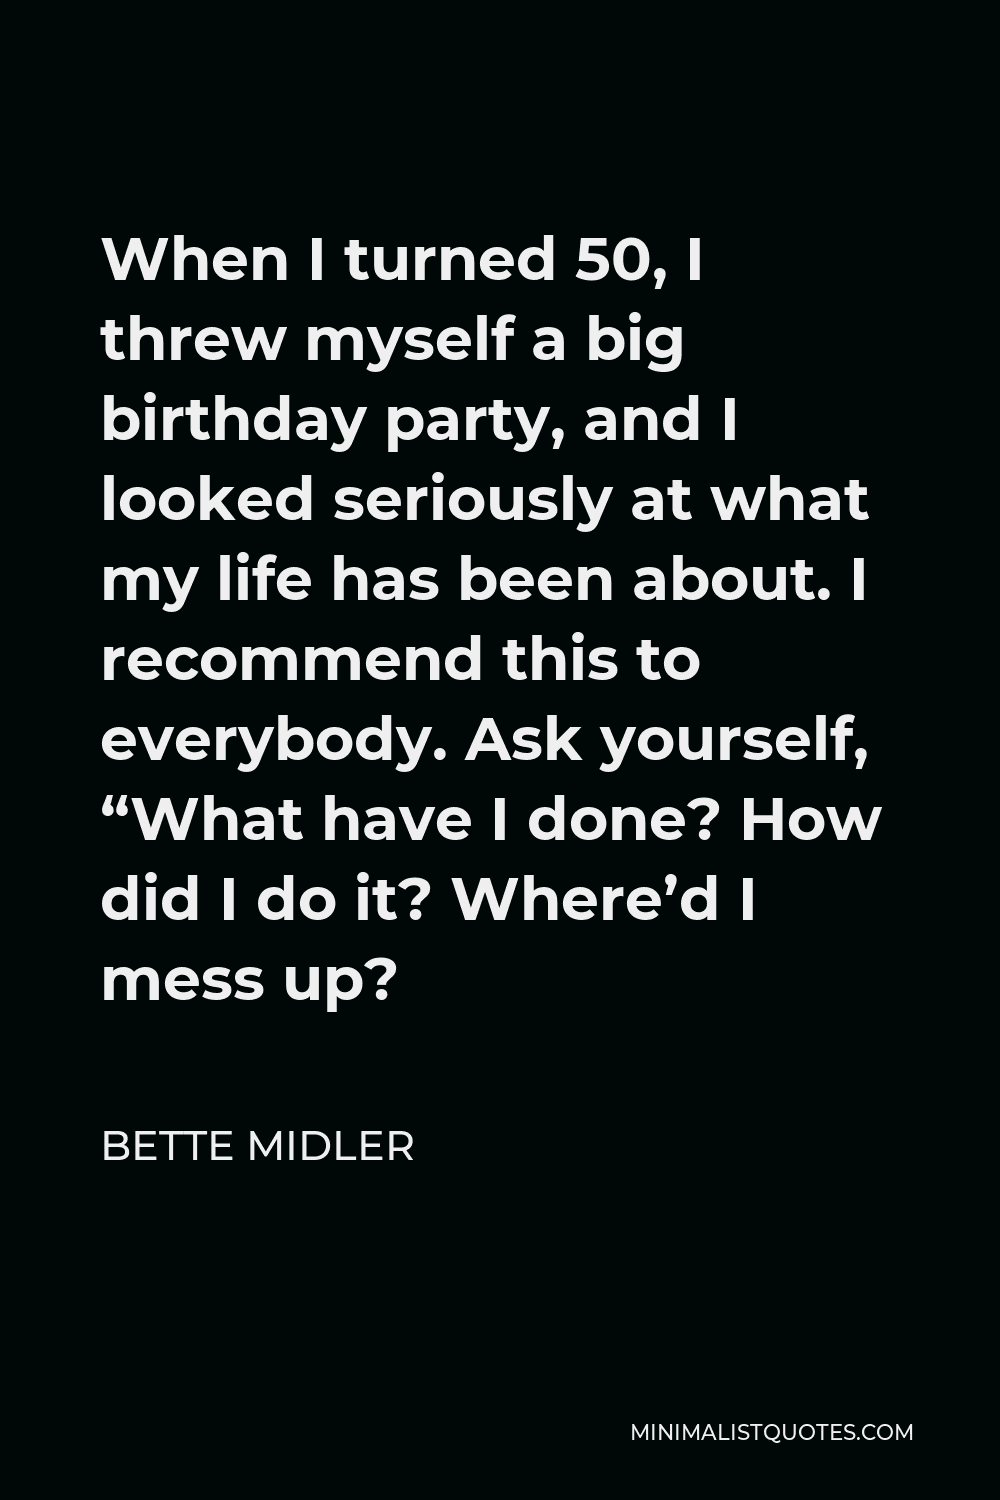 Bette Midler Quote - When I turned 50, I threw myself a big birthday party, and I looked seriously at what my life has been about. I recommend this to everybody. Ask yourself, “What have I done? How did I do it? Where’d I mess up?